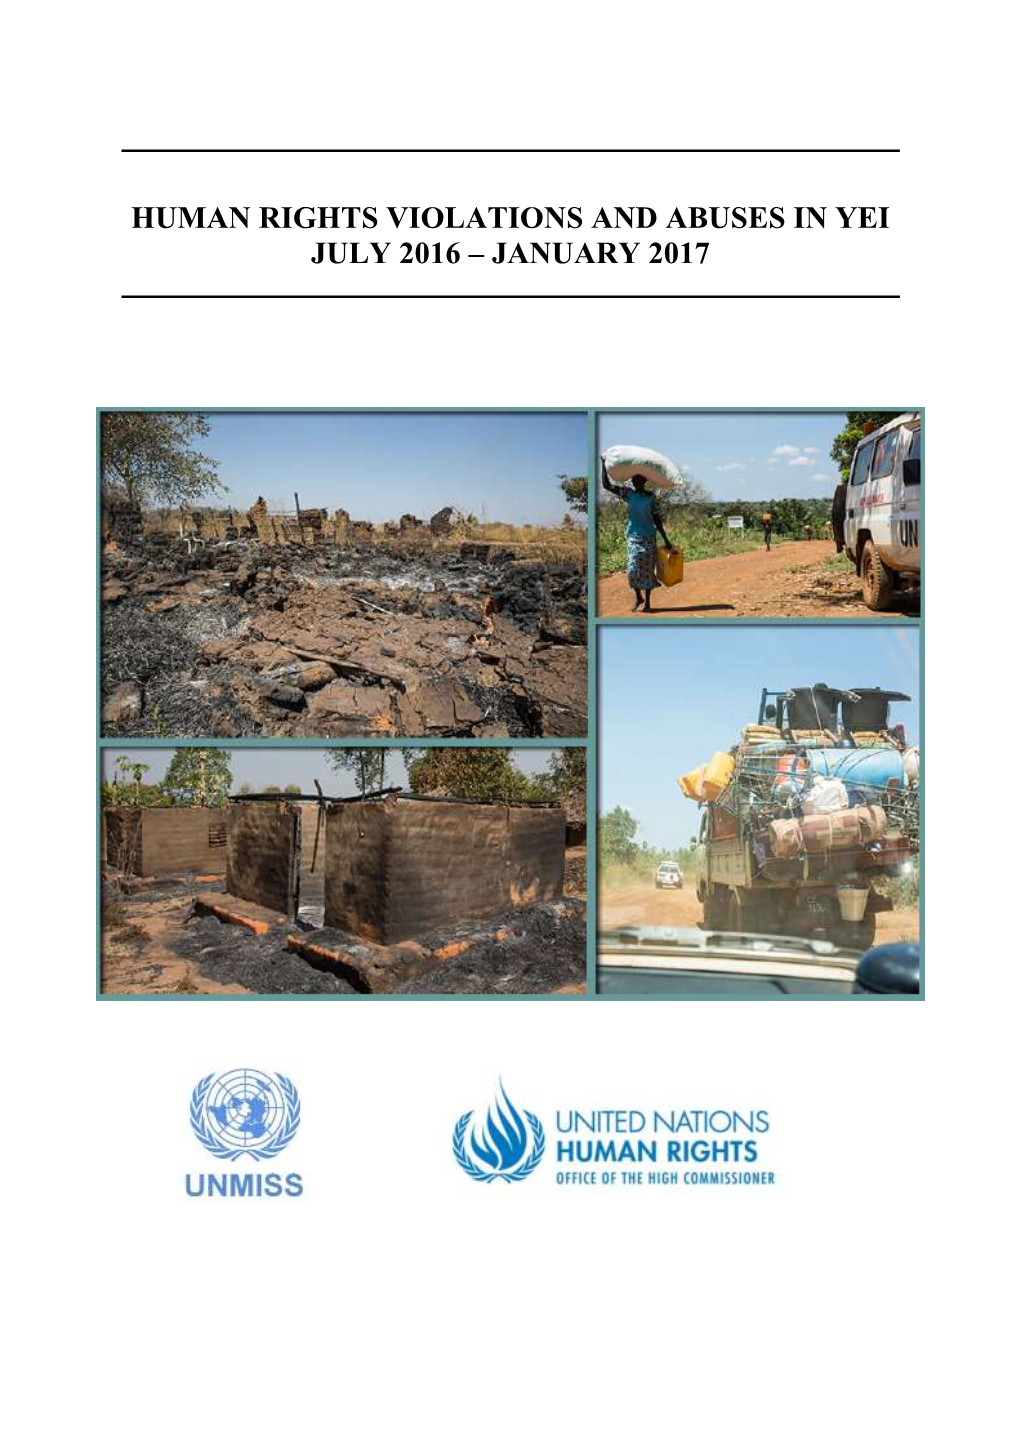 Human Rights Violations and Abuses in Yei July 2016 – January 2017